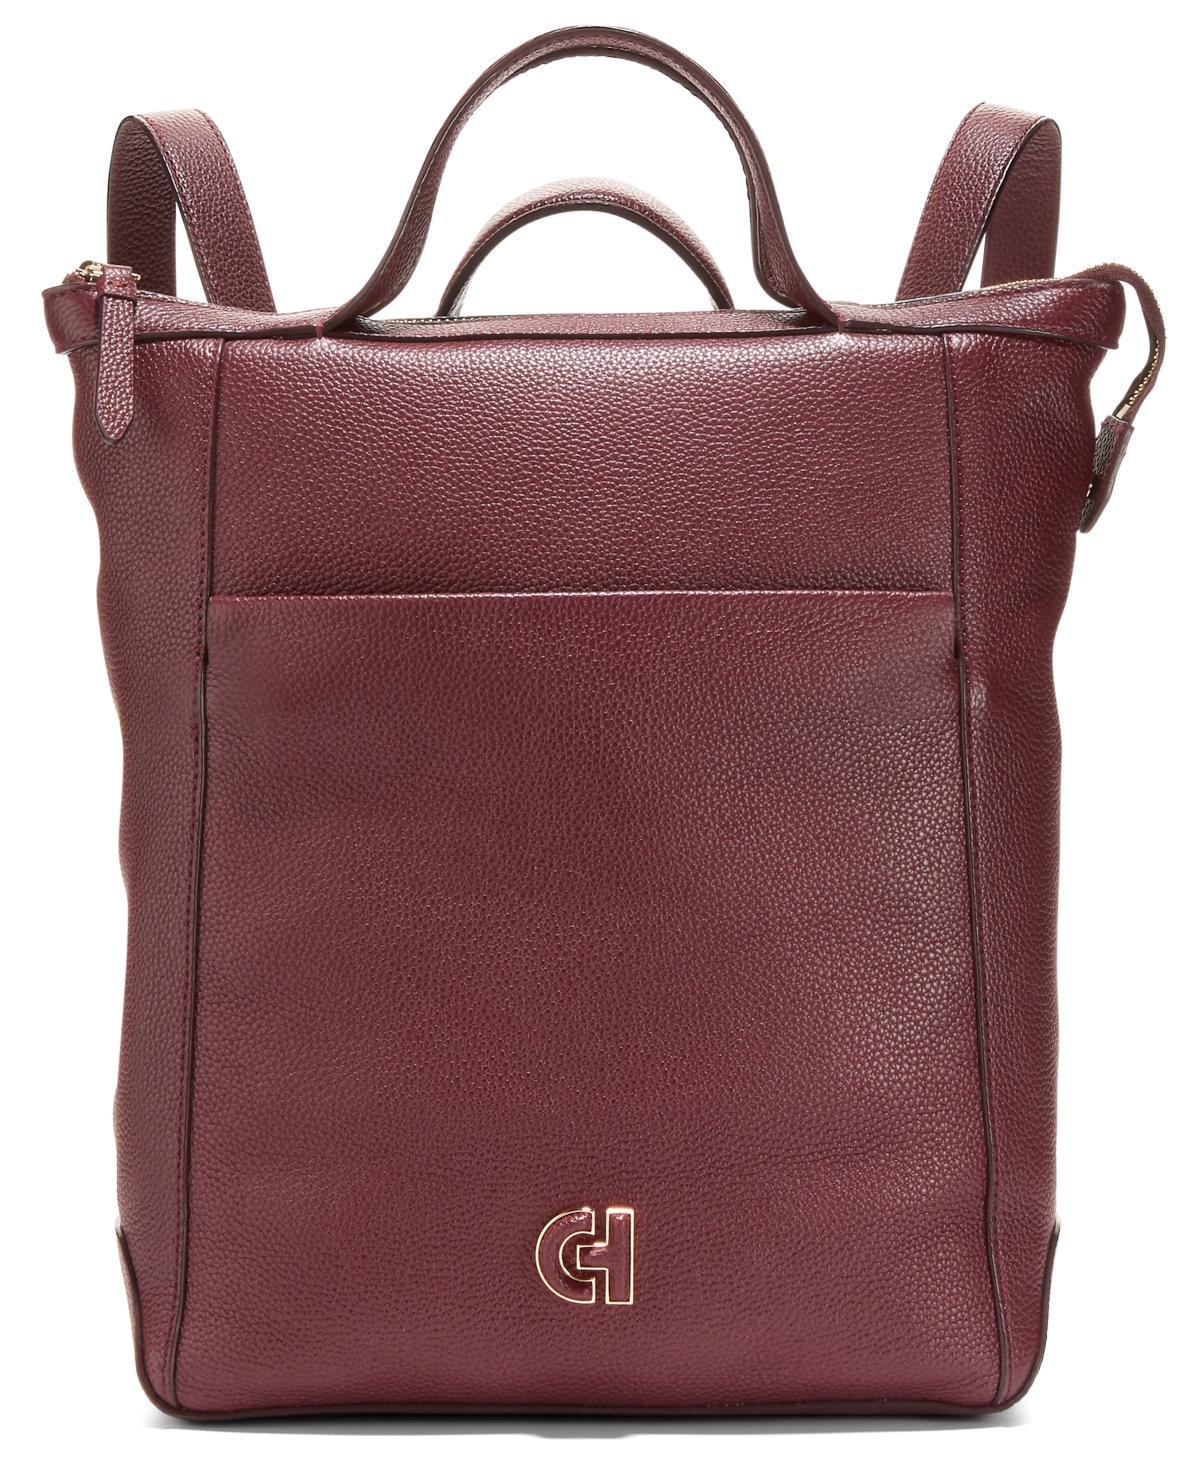 COLE HAAN SMALL GRAND AMBITION CONVERTIBLE LEATHER BACKPACK